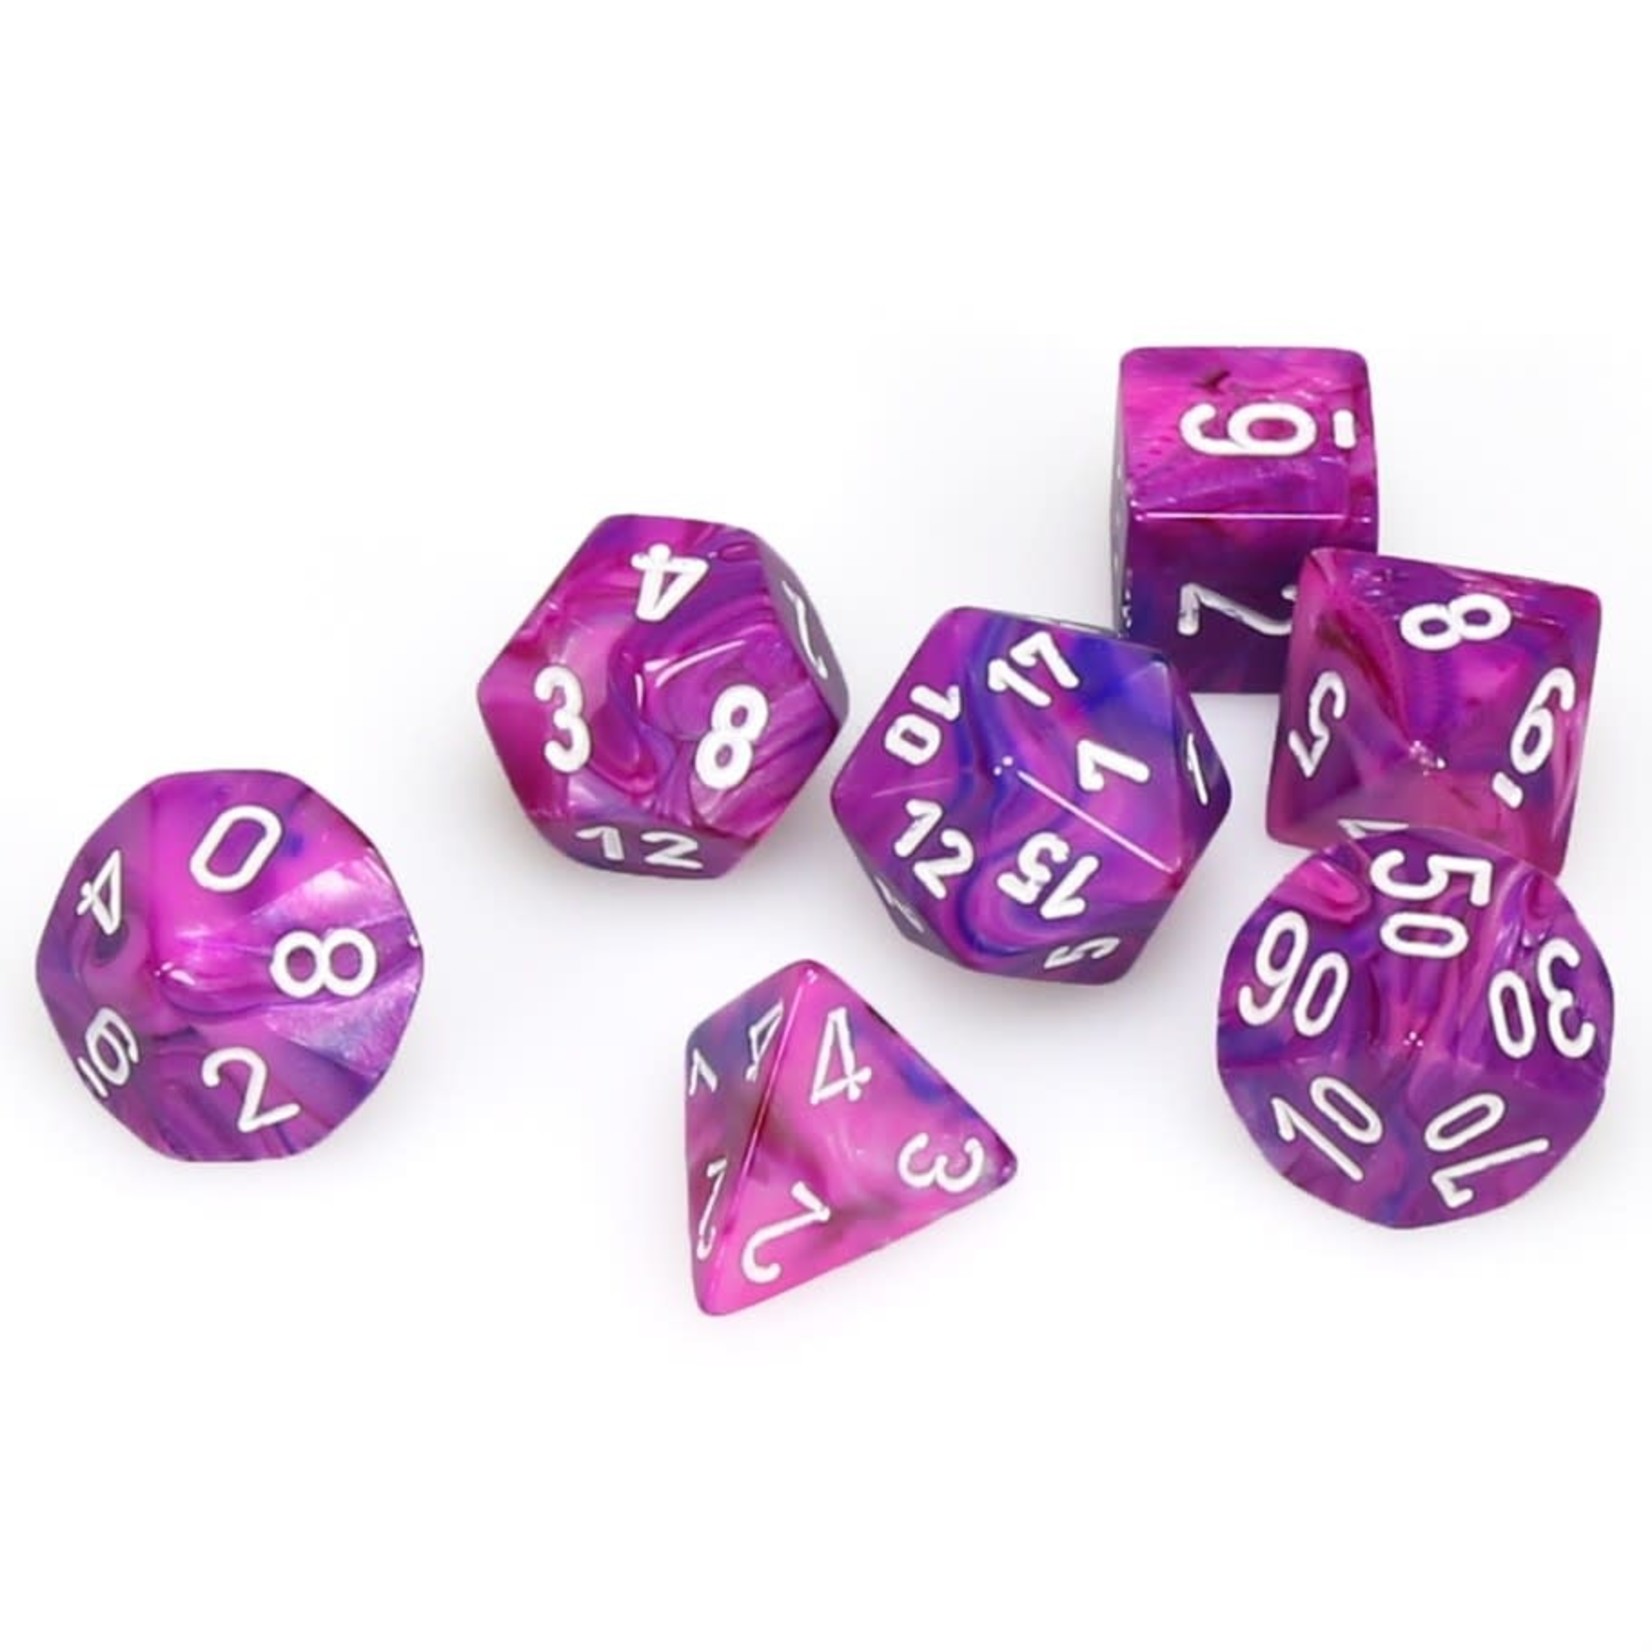 Chessex Chessex Festive Violet with White Polyhedral 7 die set